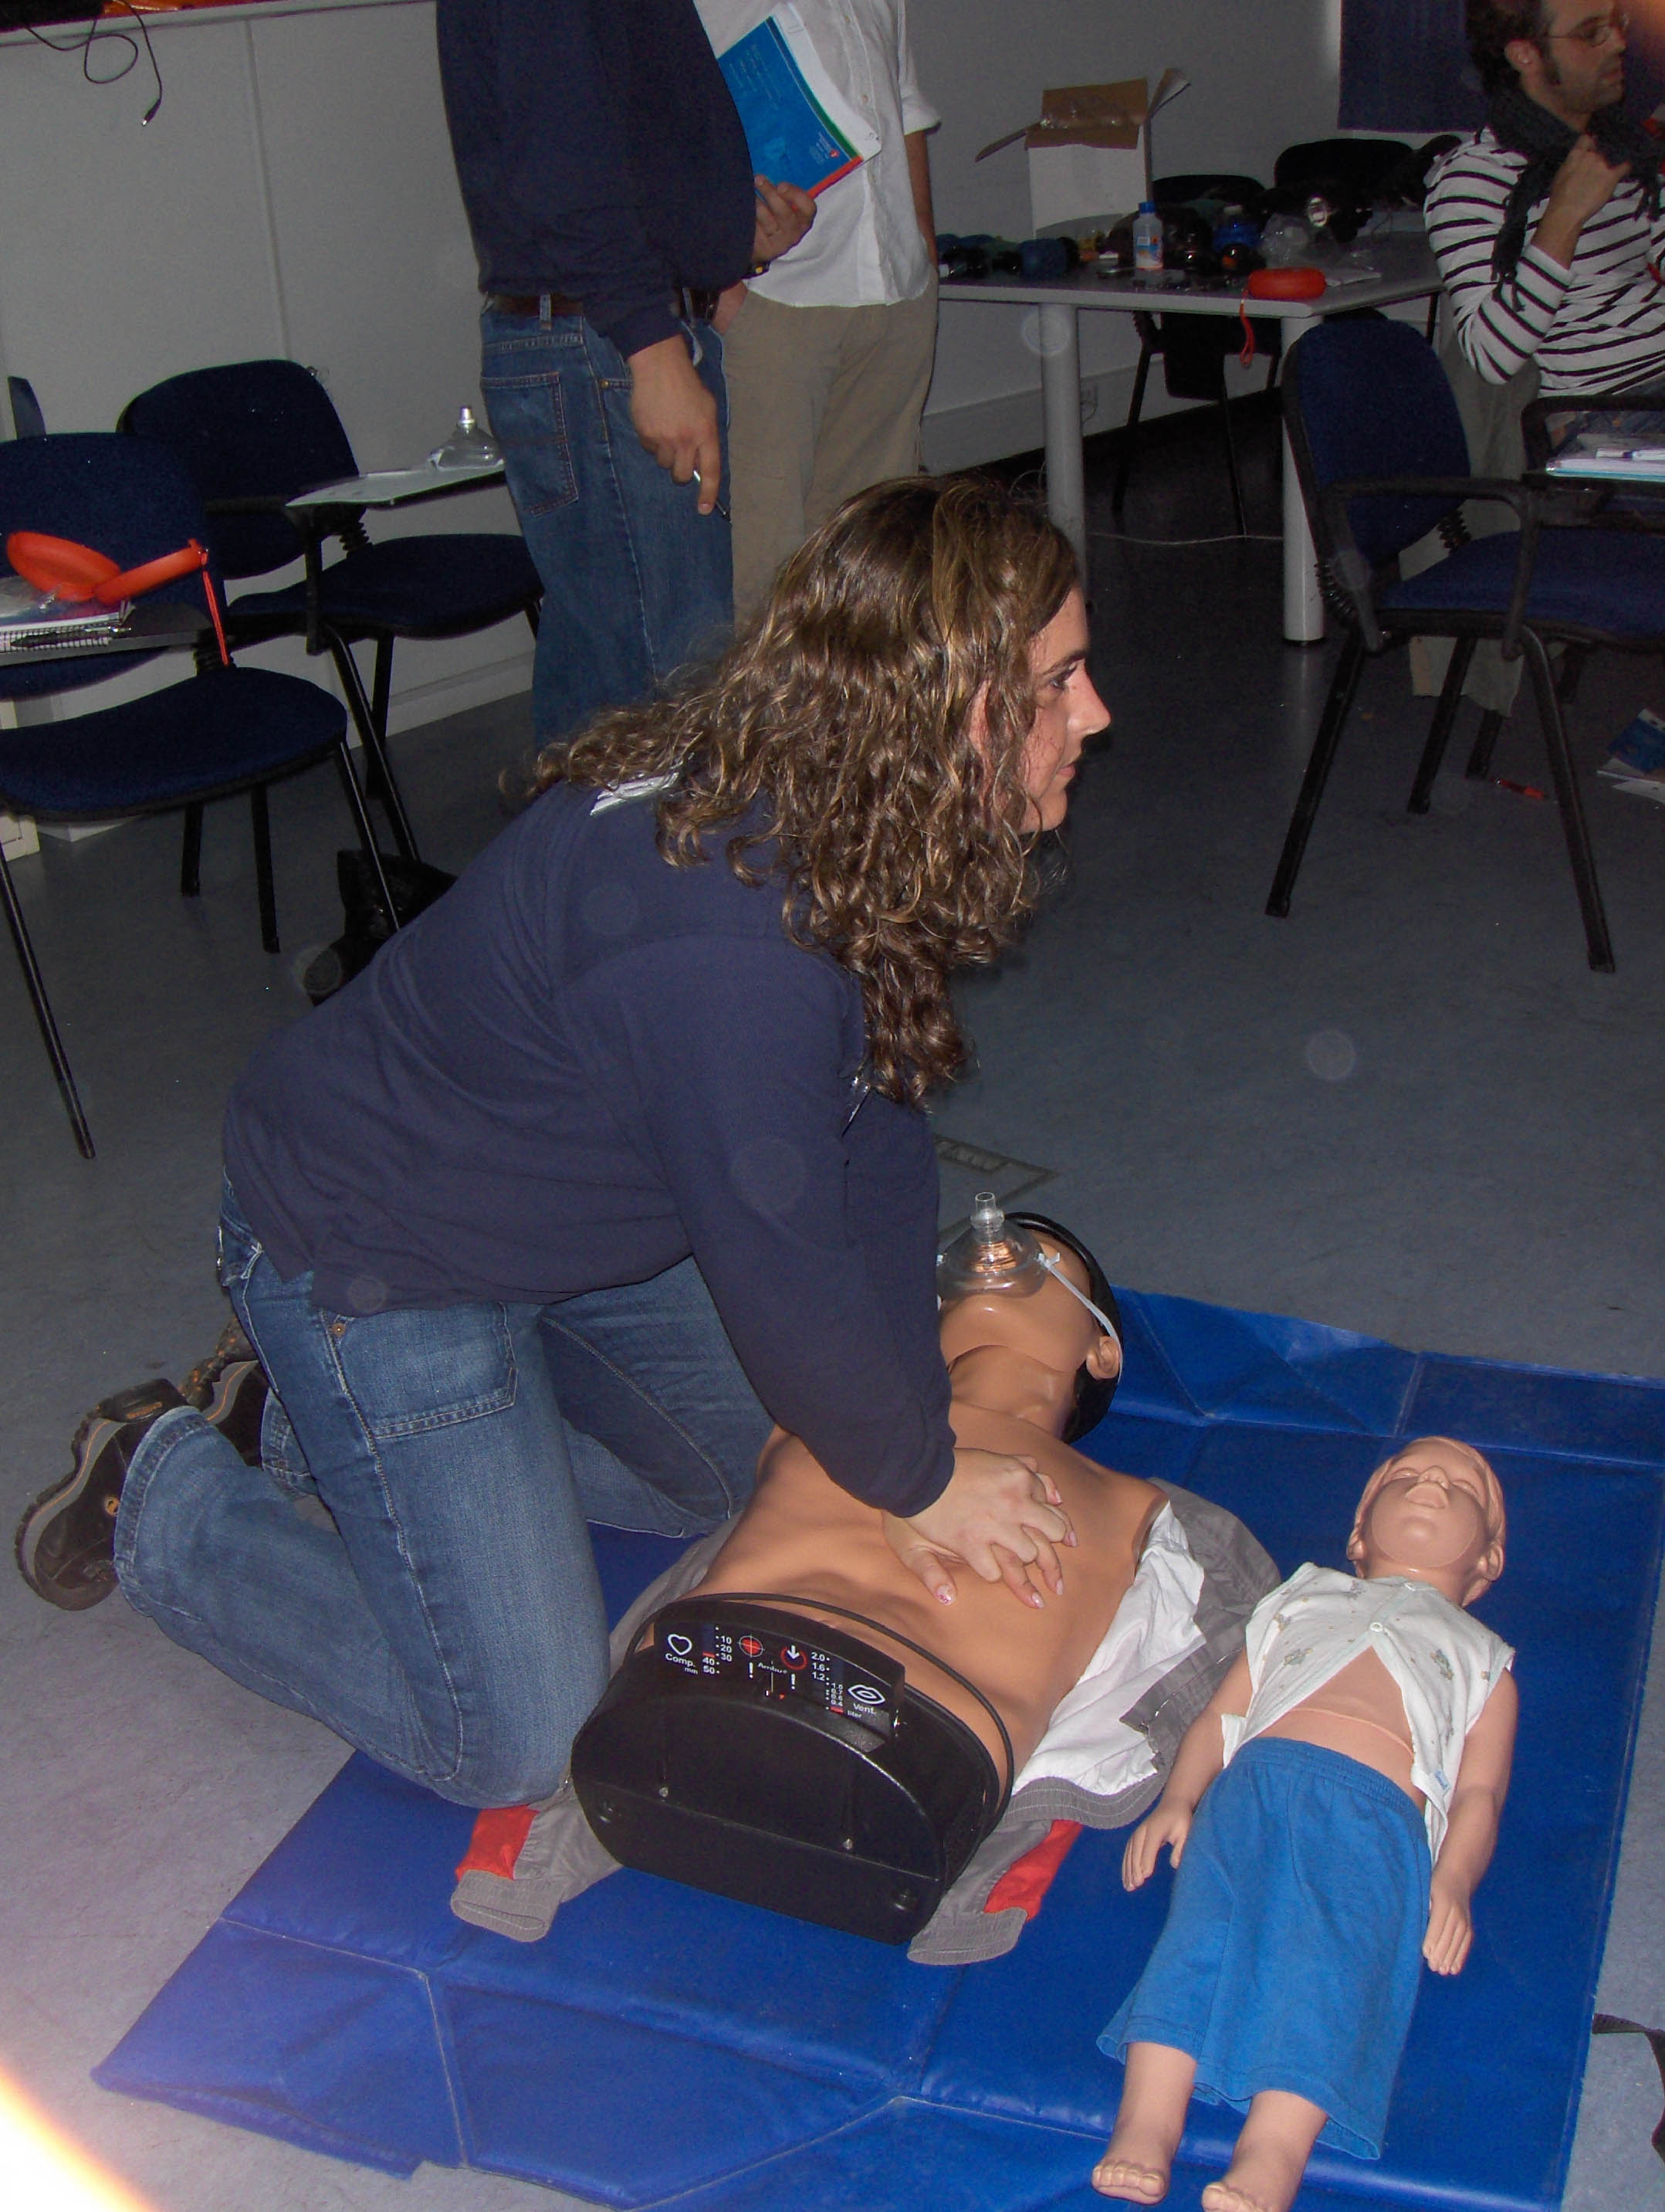 The Azores Regional Civil Protection and Fire Department Service offers Basic Life Support course